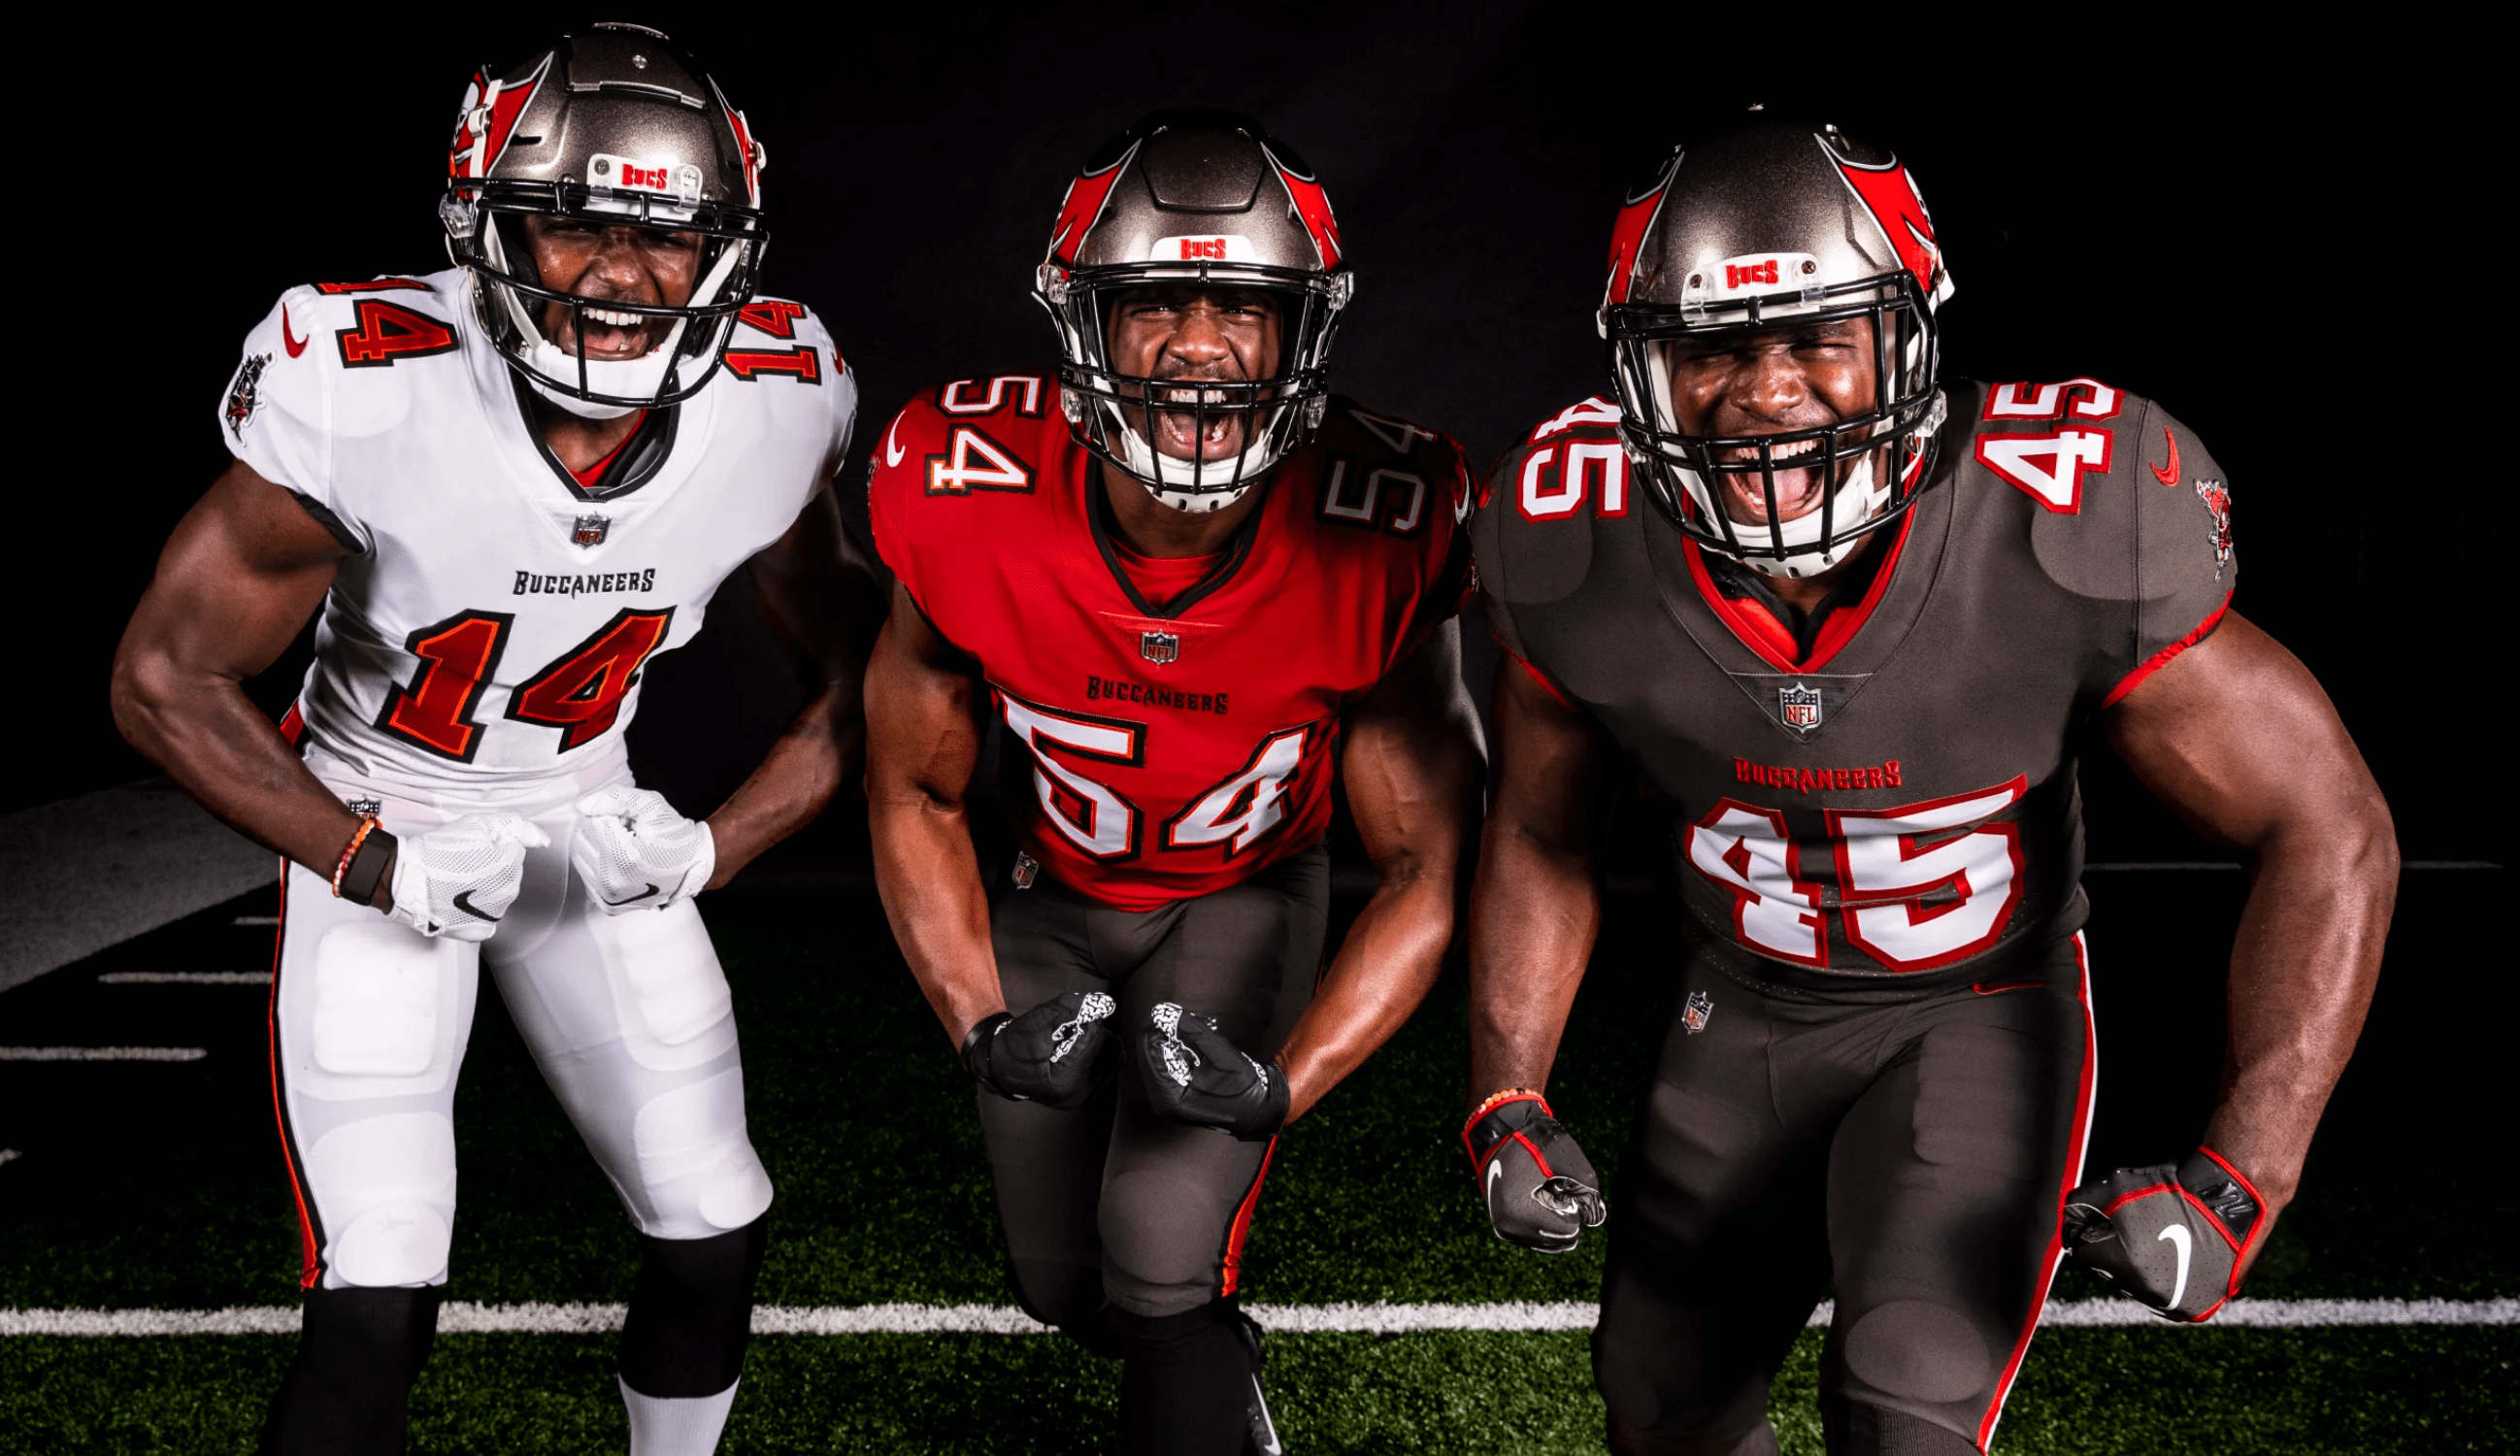 Uni Watch Power Rankings for the NFL's New Throwback and Alternate Uniforms